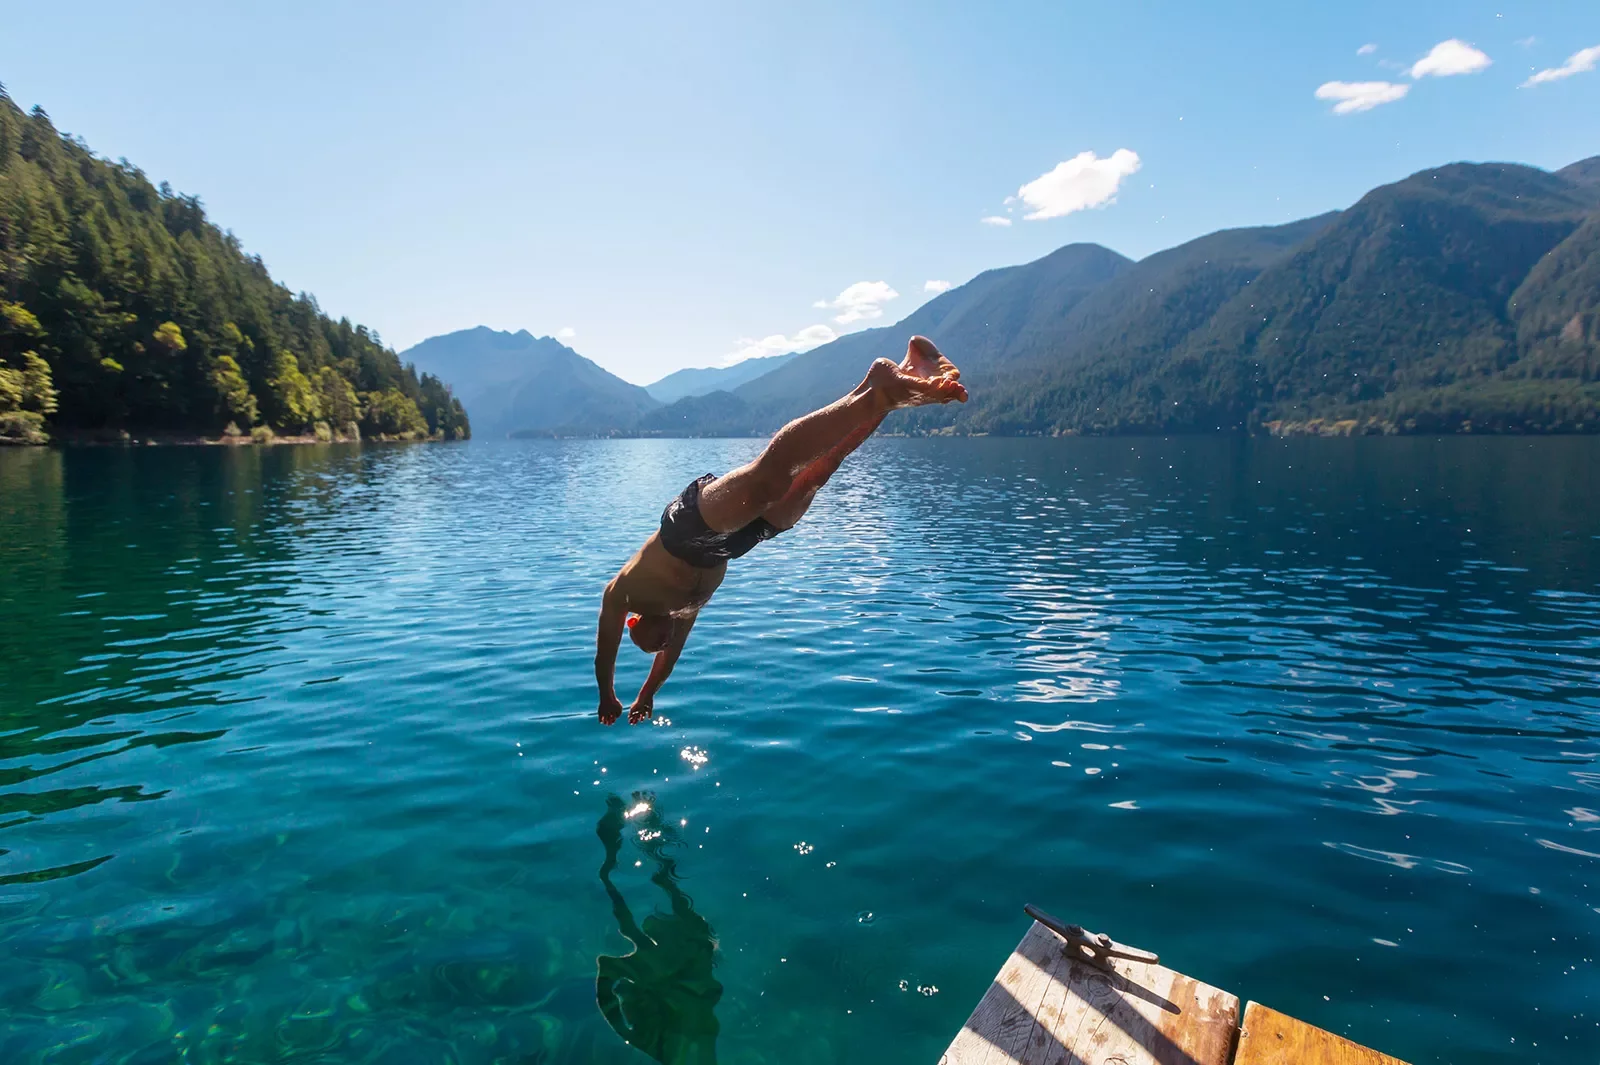 Man diving into a lake from a wooden port